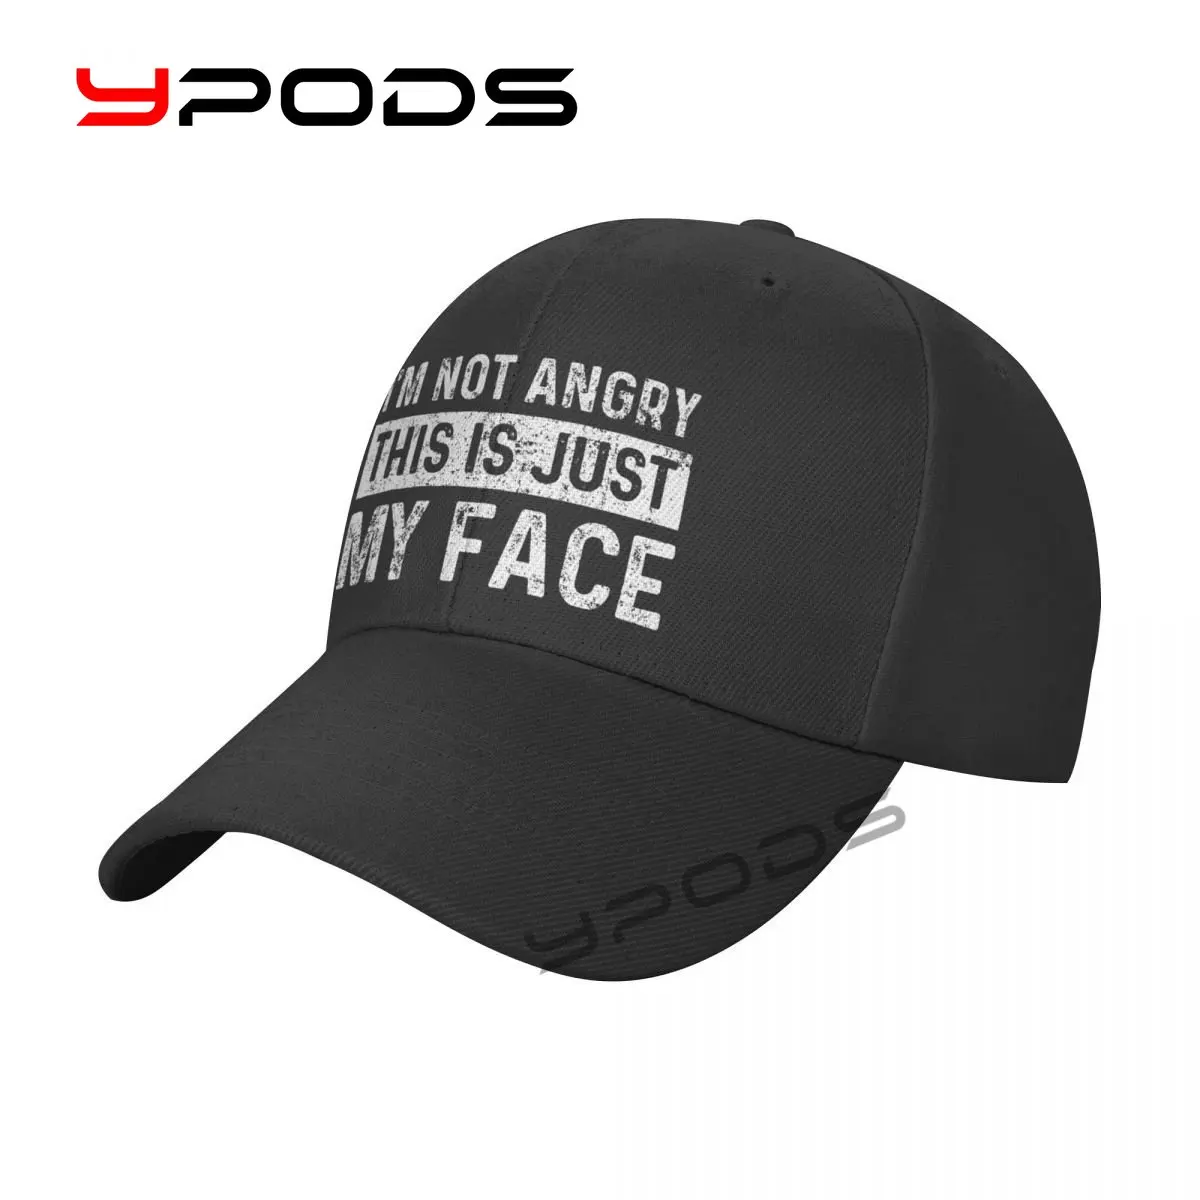 

I M Not Angry This Is Just My Face New Baseball Caps for Men Cap Women Hat Snapback Casual Cap Casquette Hats